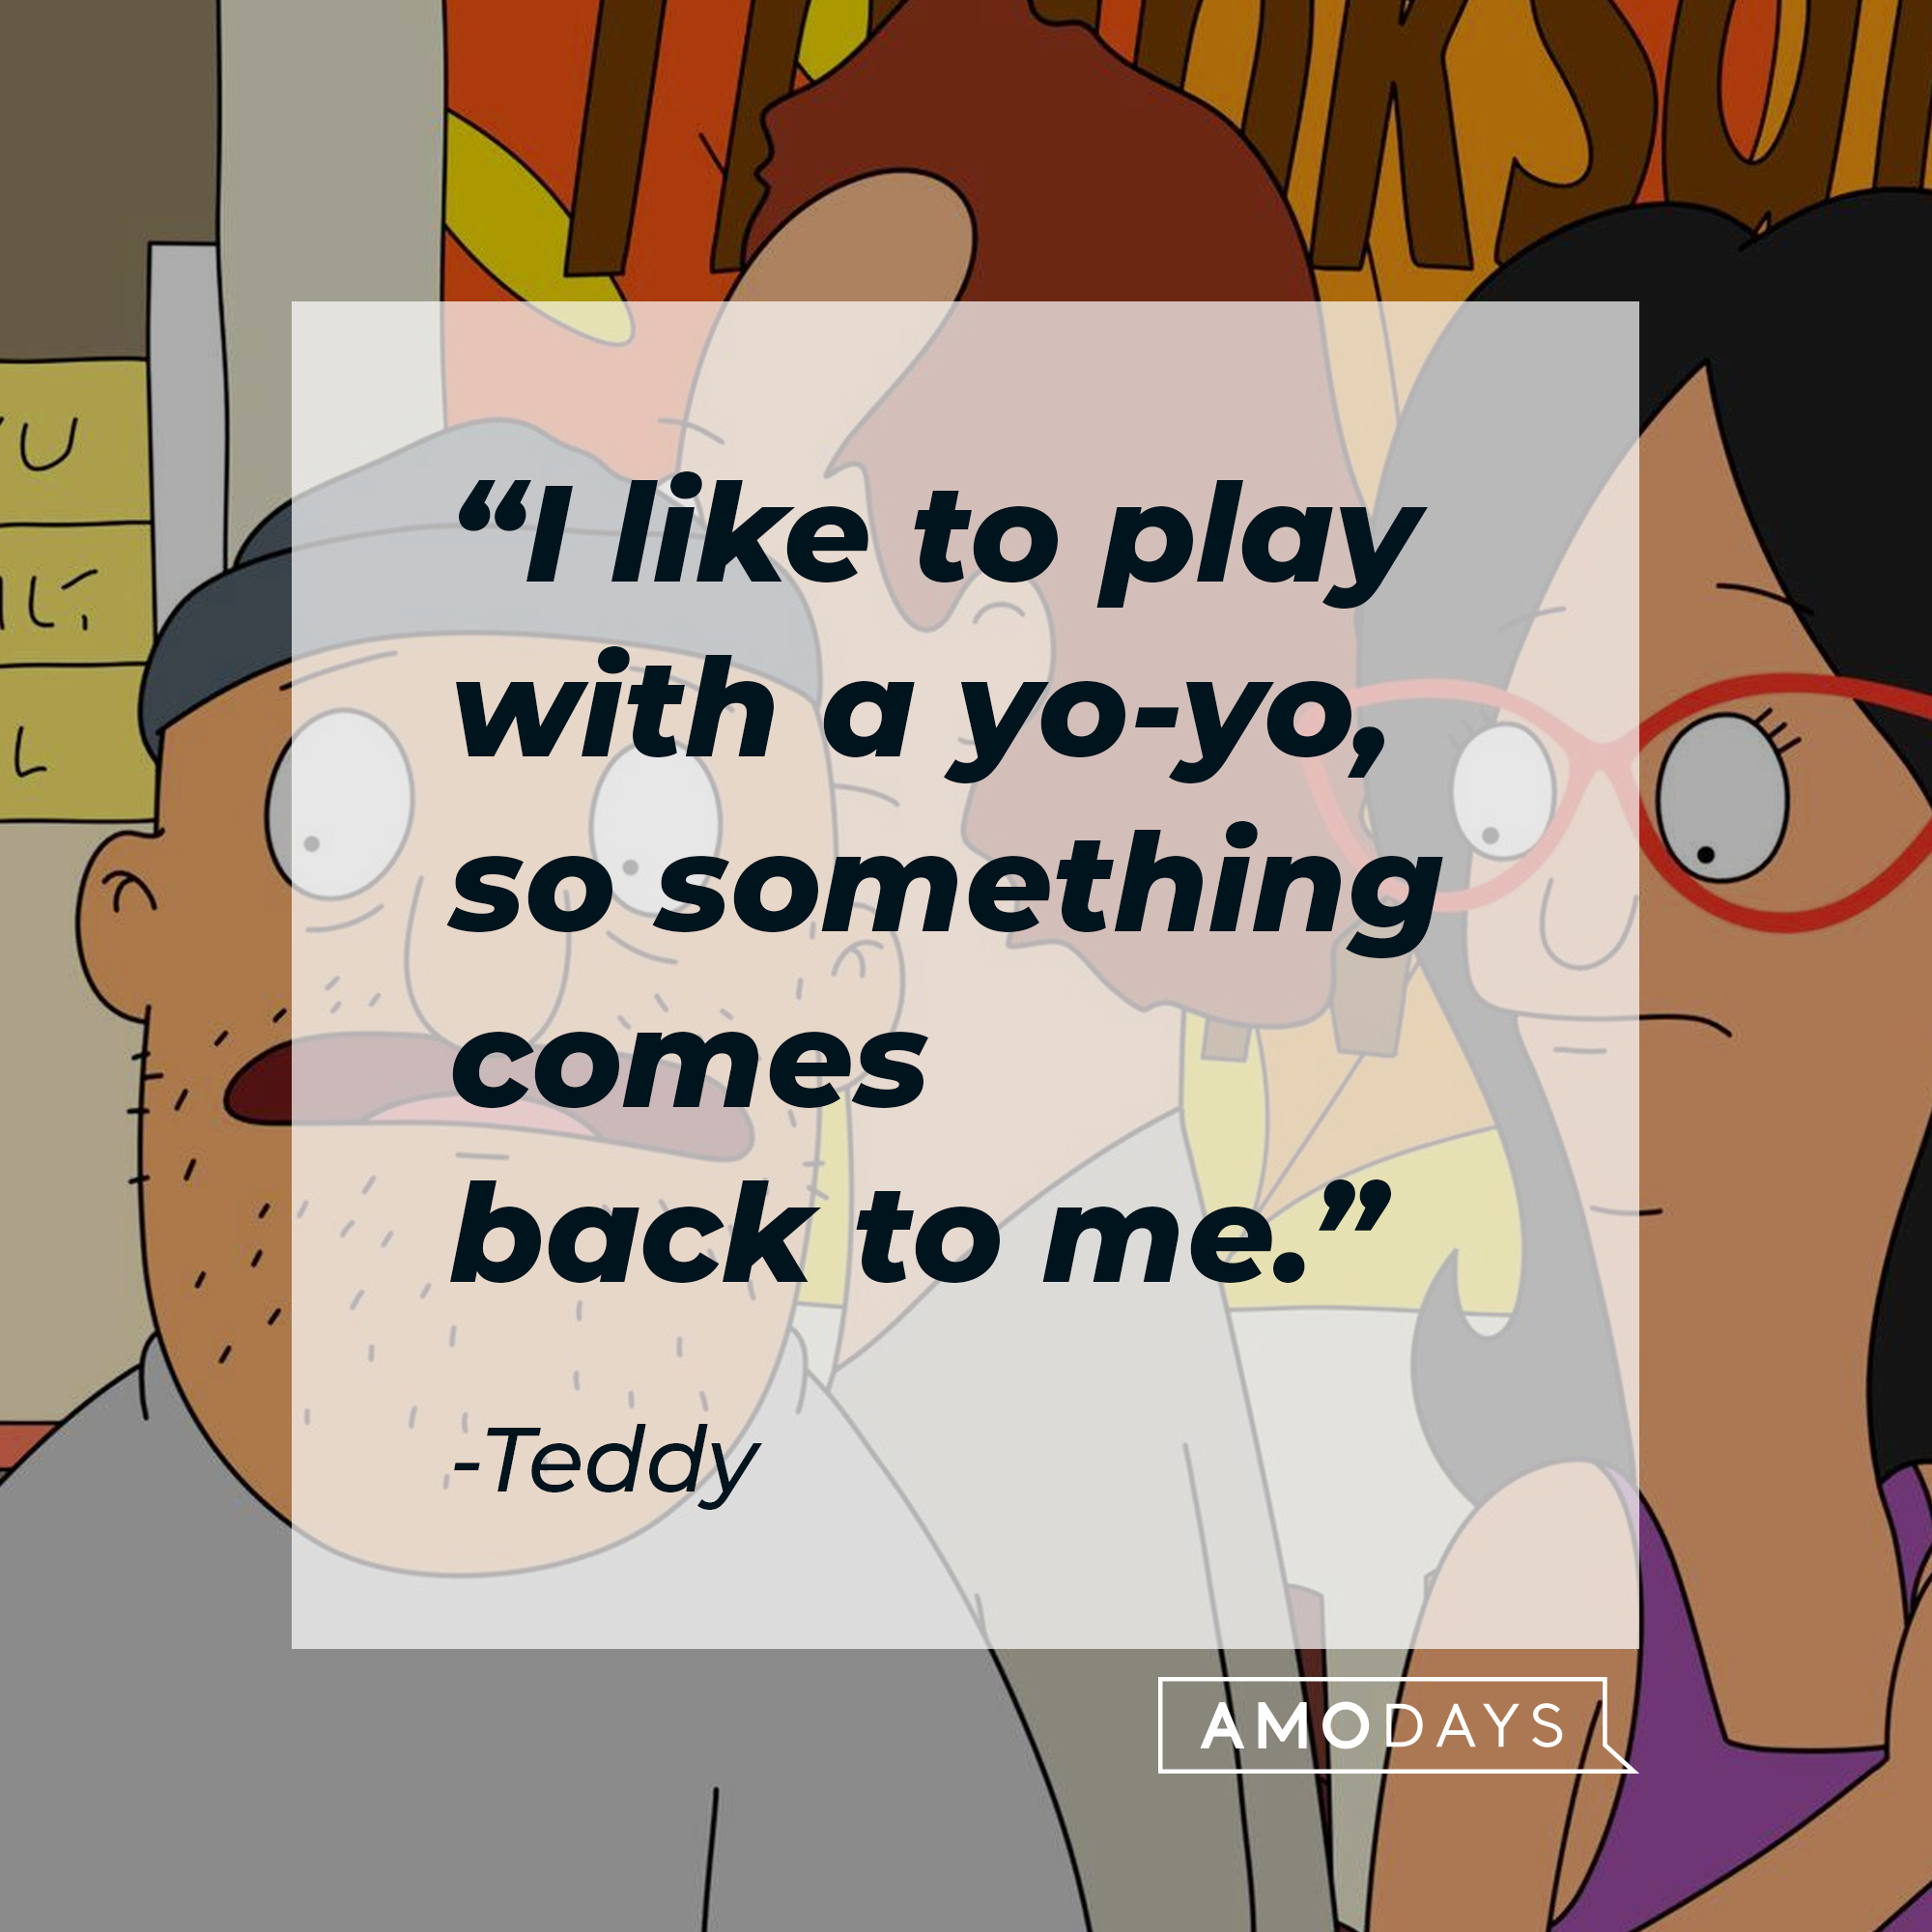 Teddy, with his quote: "I like to play with a yo-yo, so something comes back to me." | Source: Facebook.com/BobsBurgers